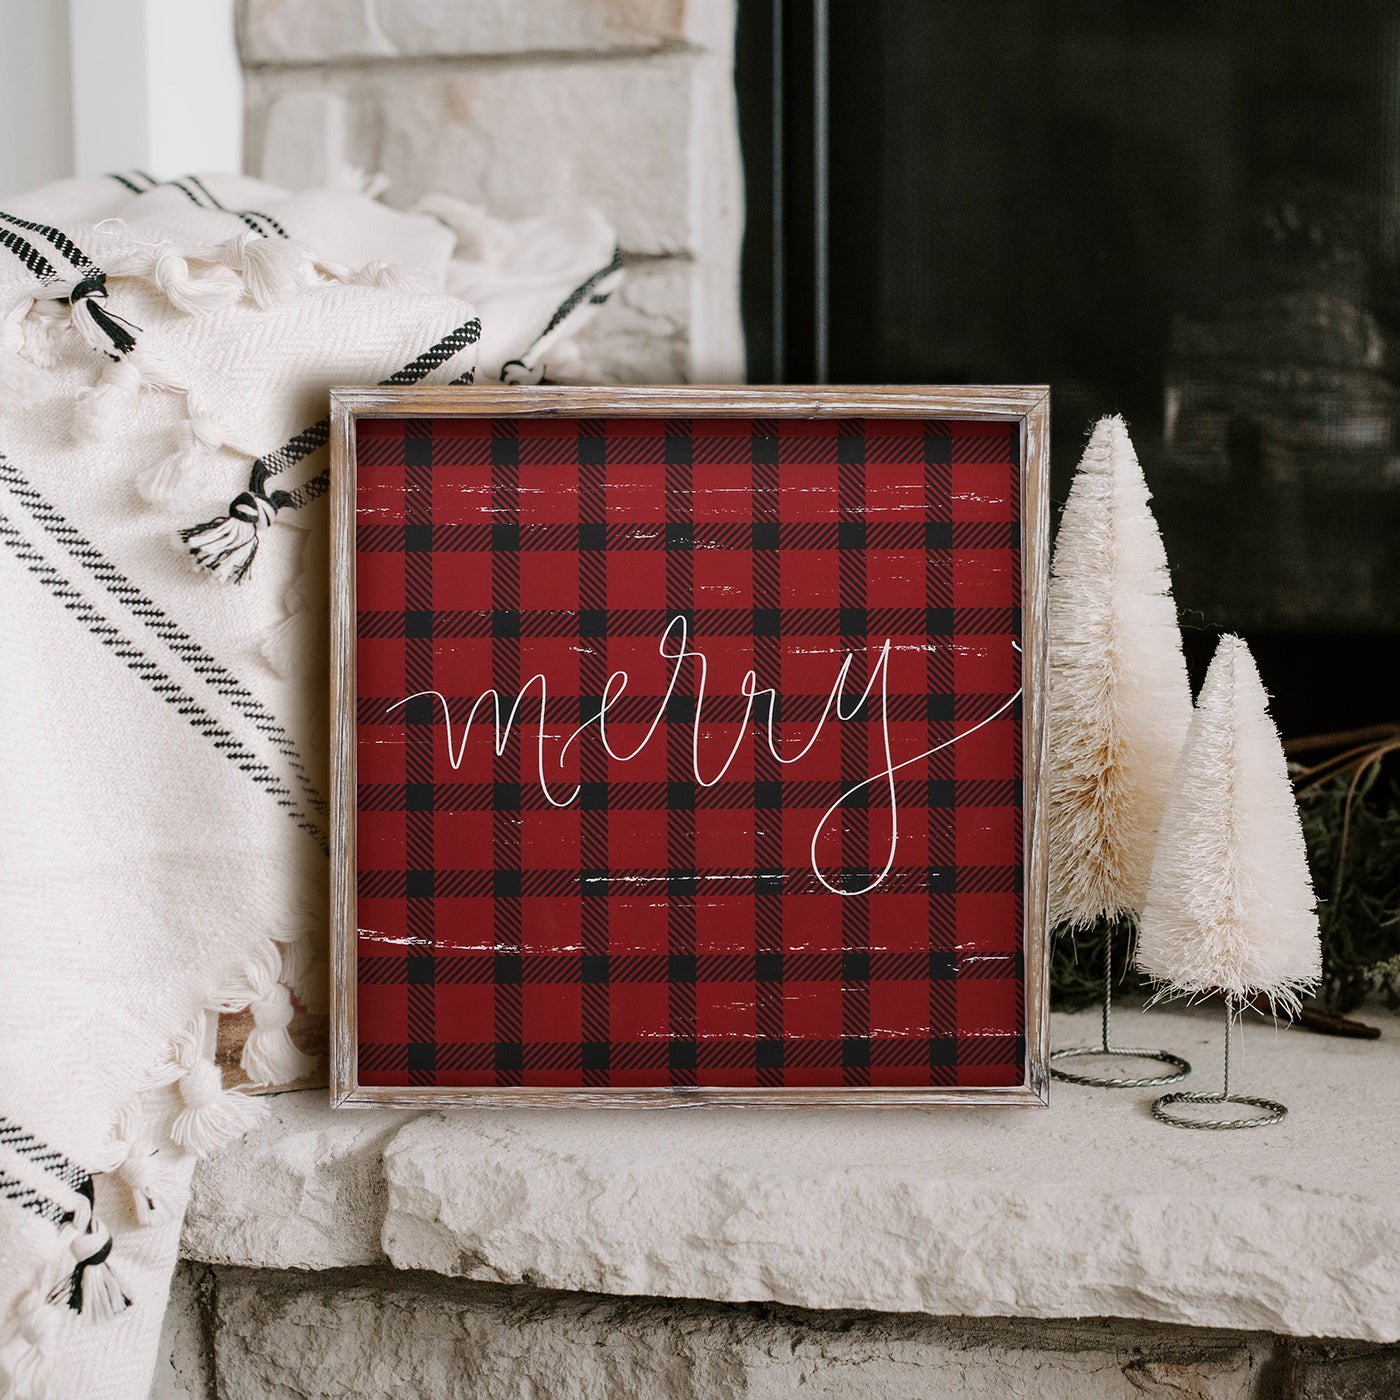 Merry Plaid Wood Sign 18x18" - Sweet Water Decor - Wood Signs